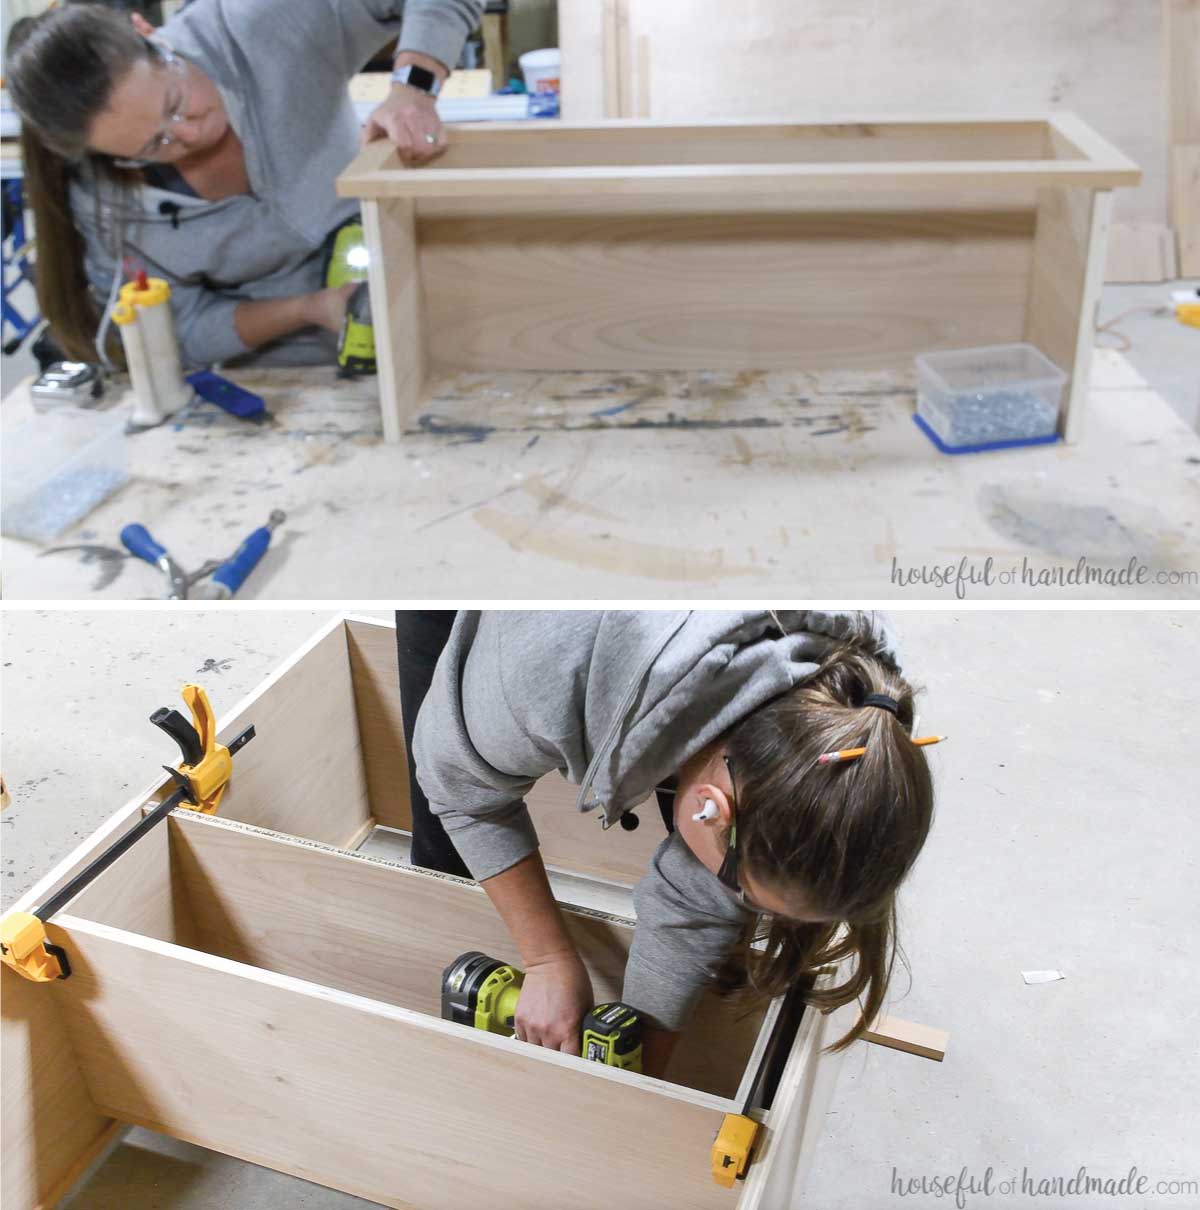 Attaching the face frame to the cubby shelves and then attaching it to the already attached shelf in the cabinet. 